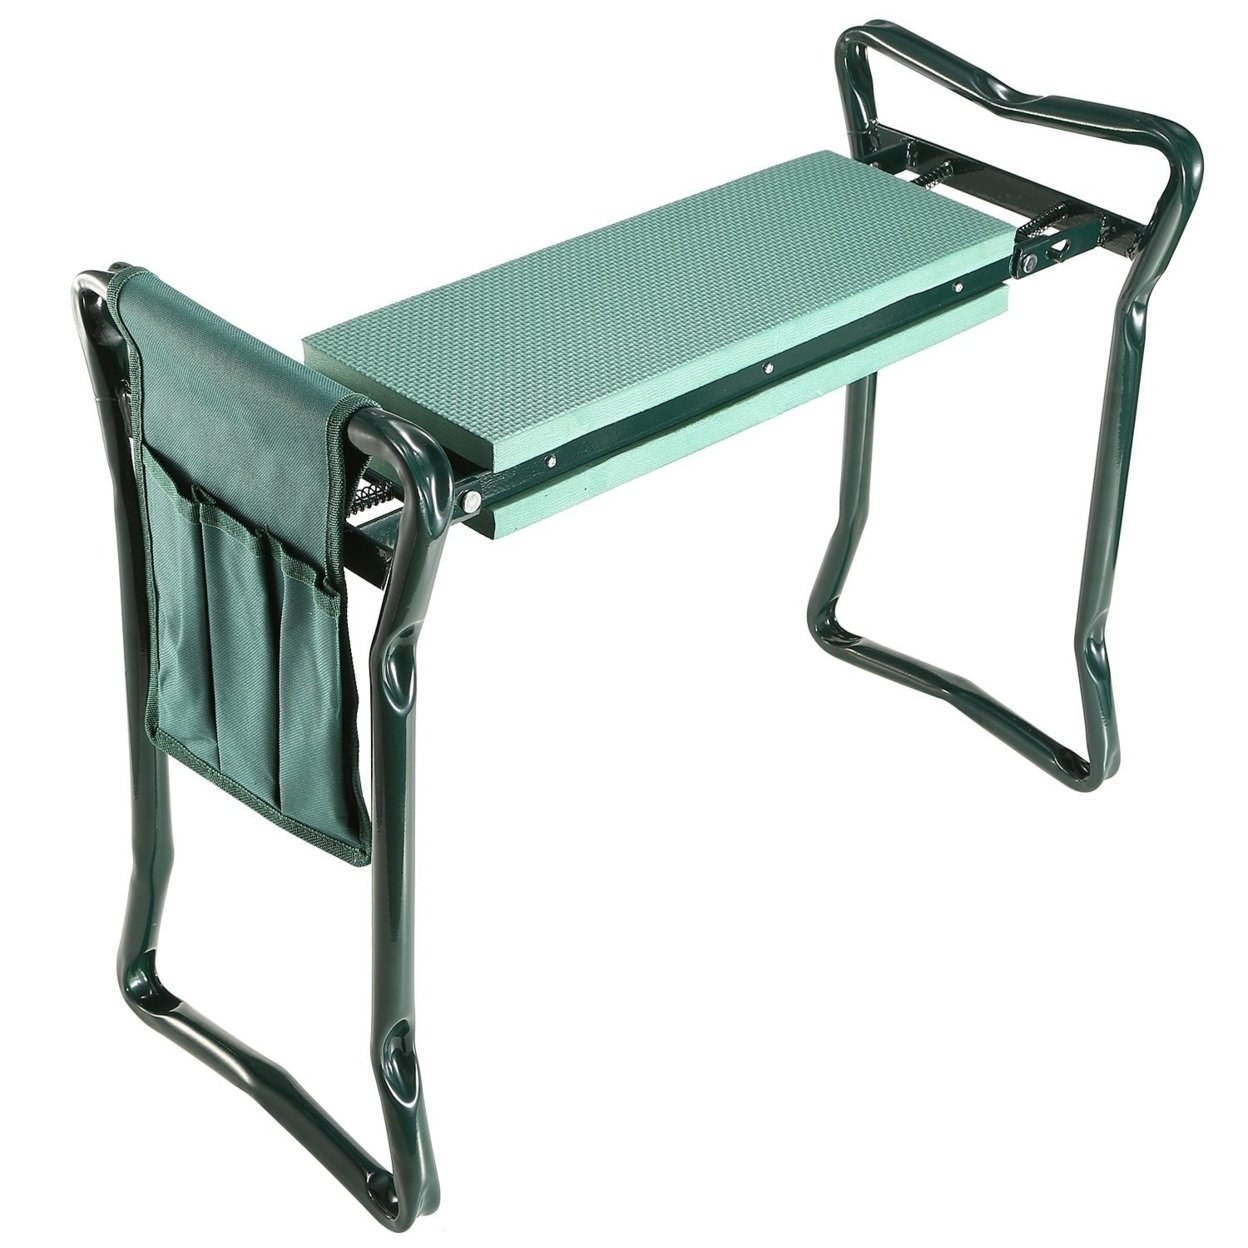 SKUSHOPS Foldable Garden Kneeler Seat with Kneeling Soft Cushion Pad Tools Pouch Portable Gardener